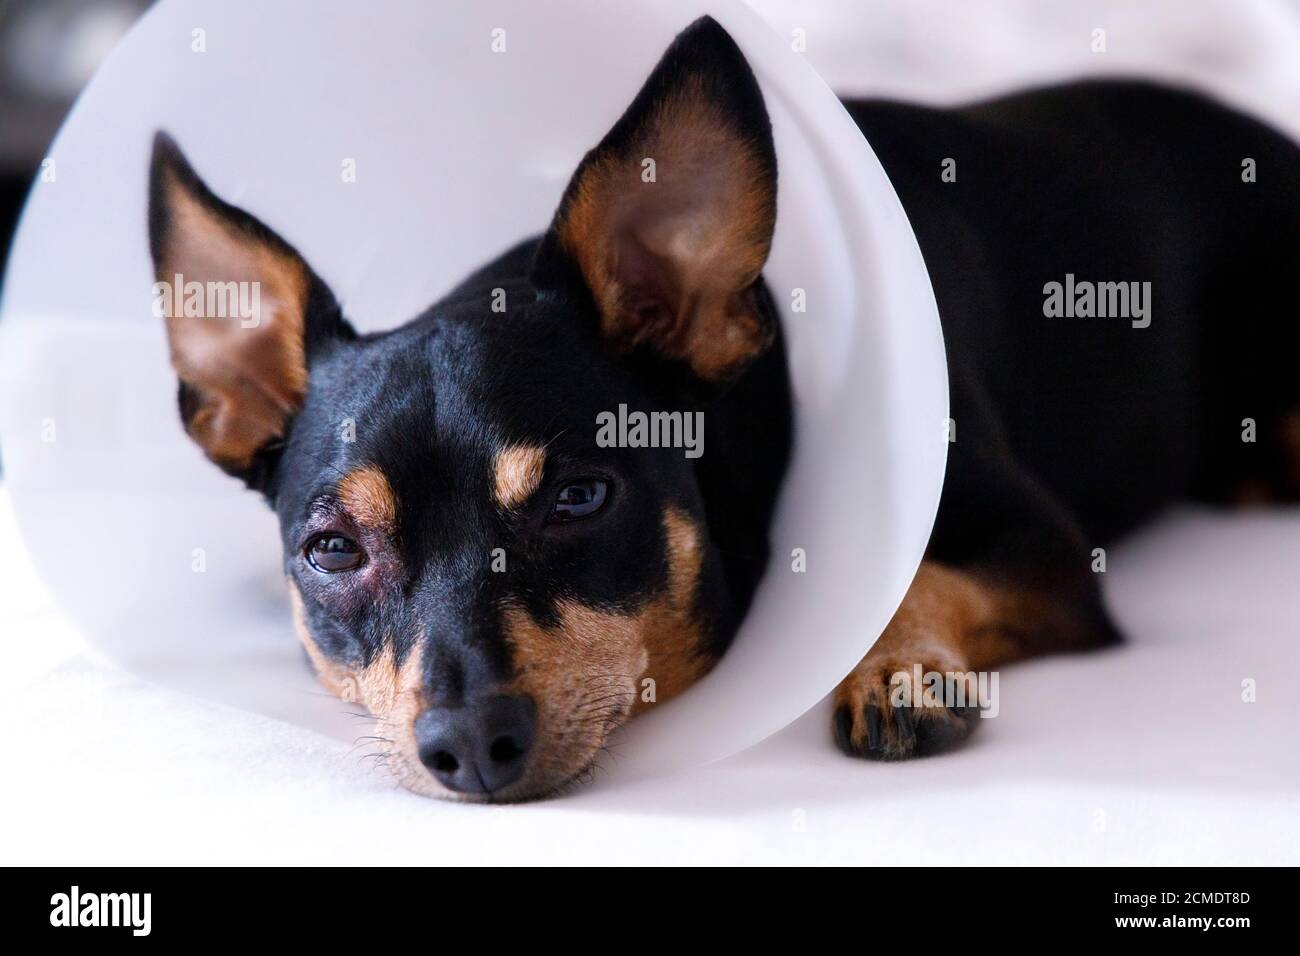 Sick Dog With Protective Elizabethan Collar Pets Veterinary Clinic Stock Photo